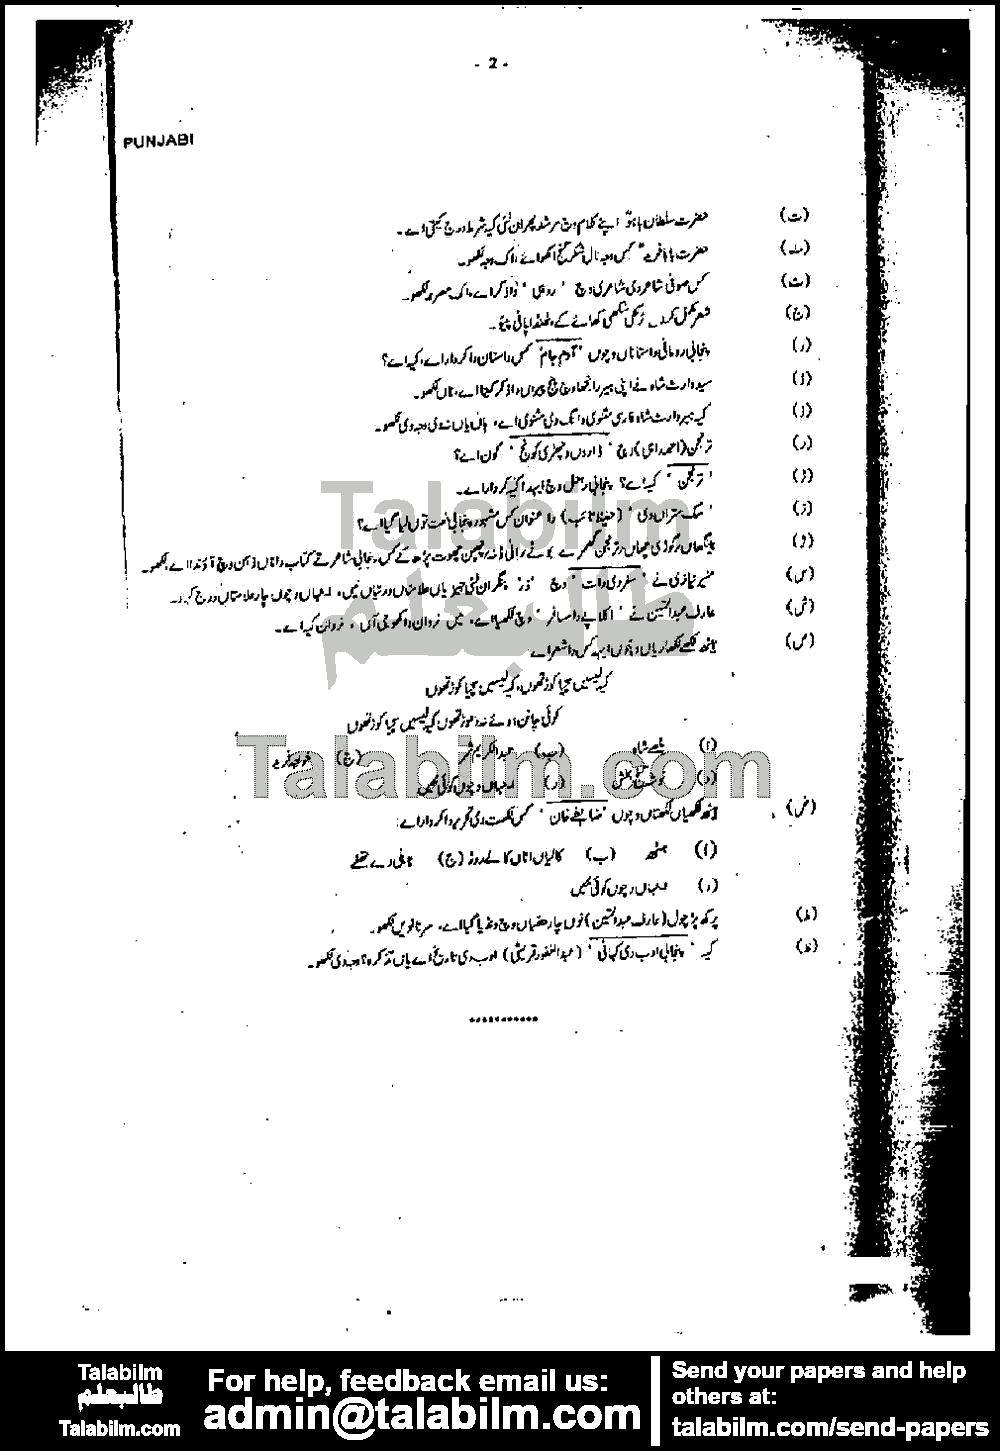 Punjabi 0 past paper for 2001 Page No. 2